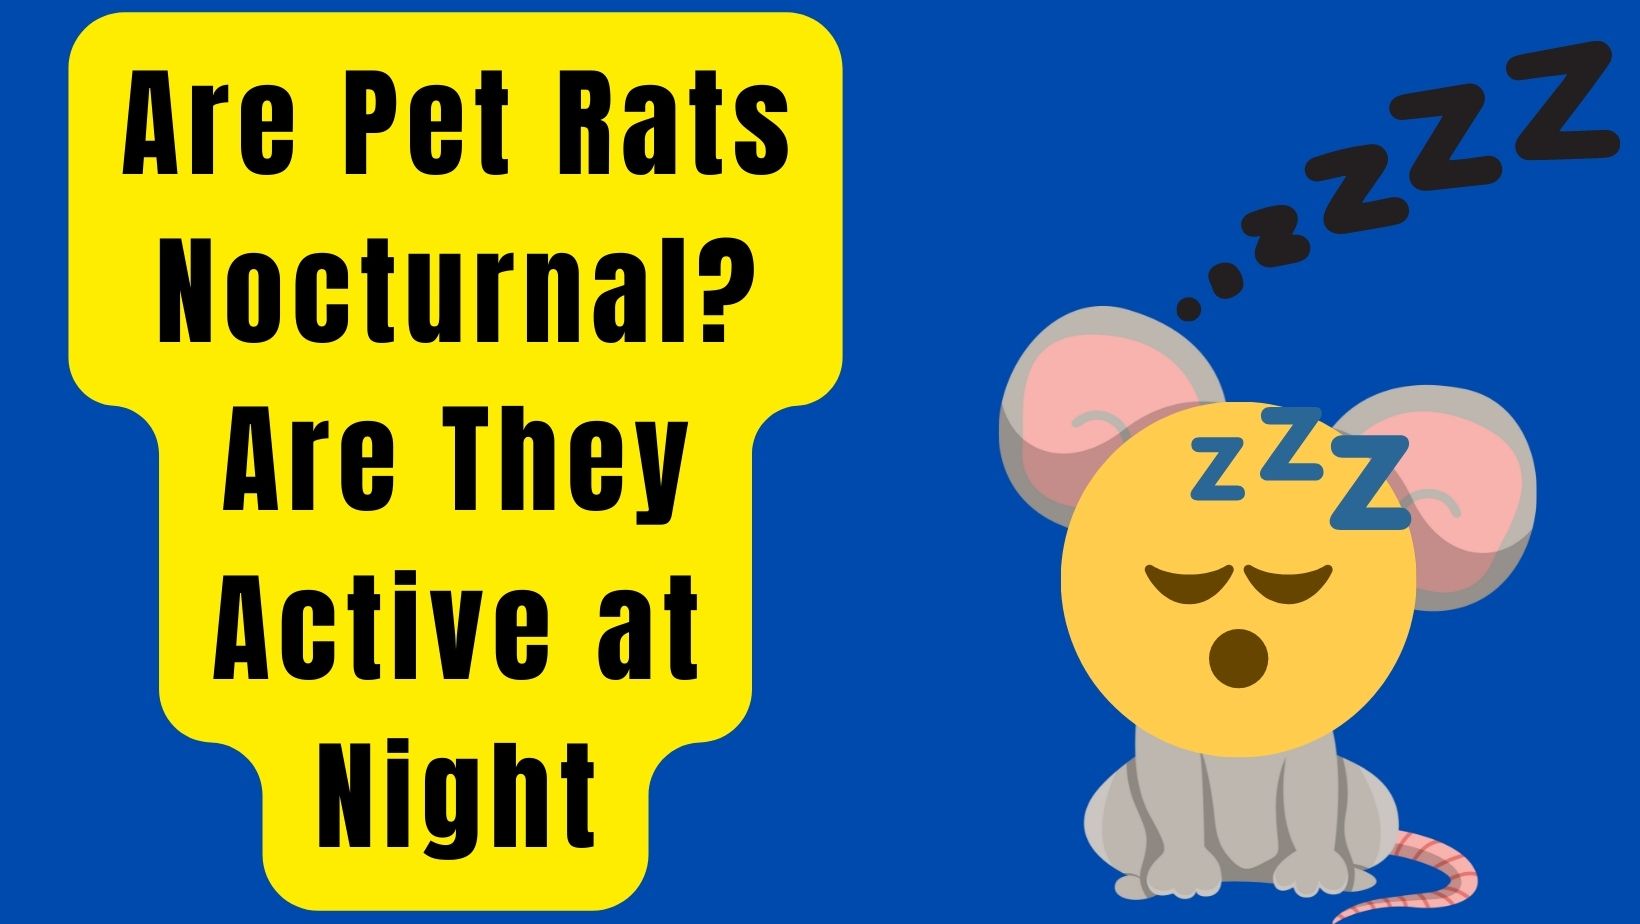 Are Pet Rats Nocturnal? Are Rats Active at Night?